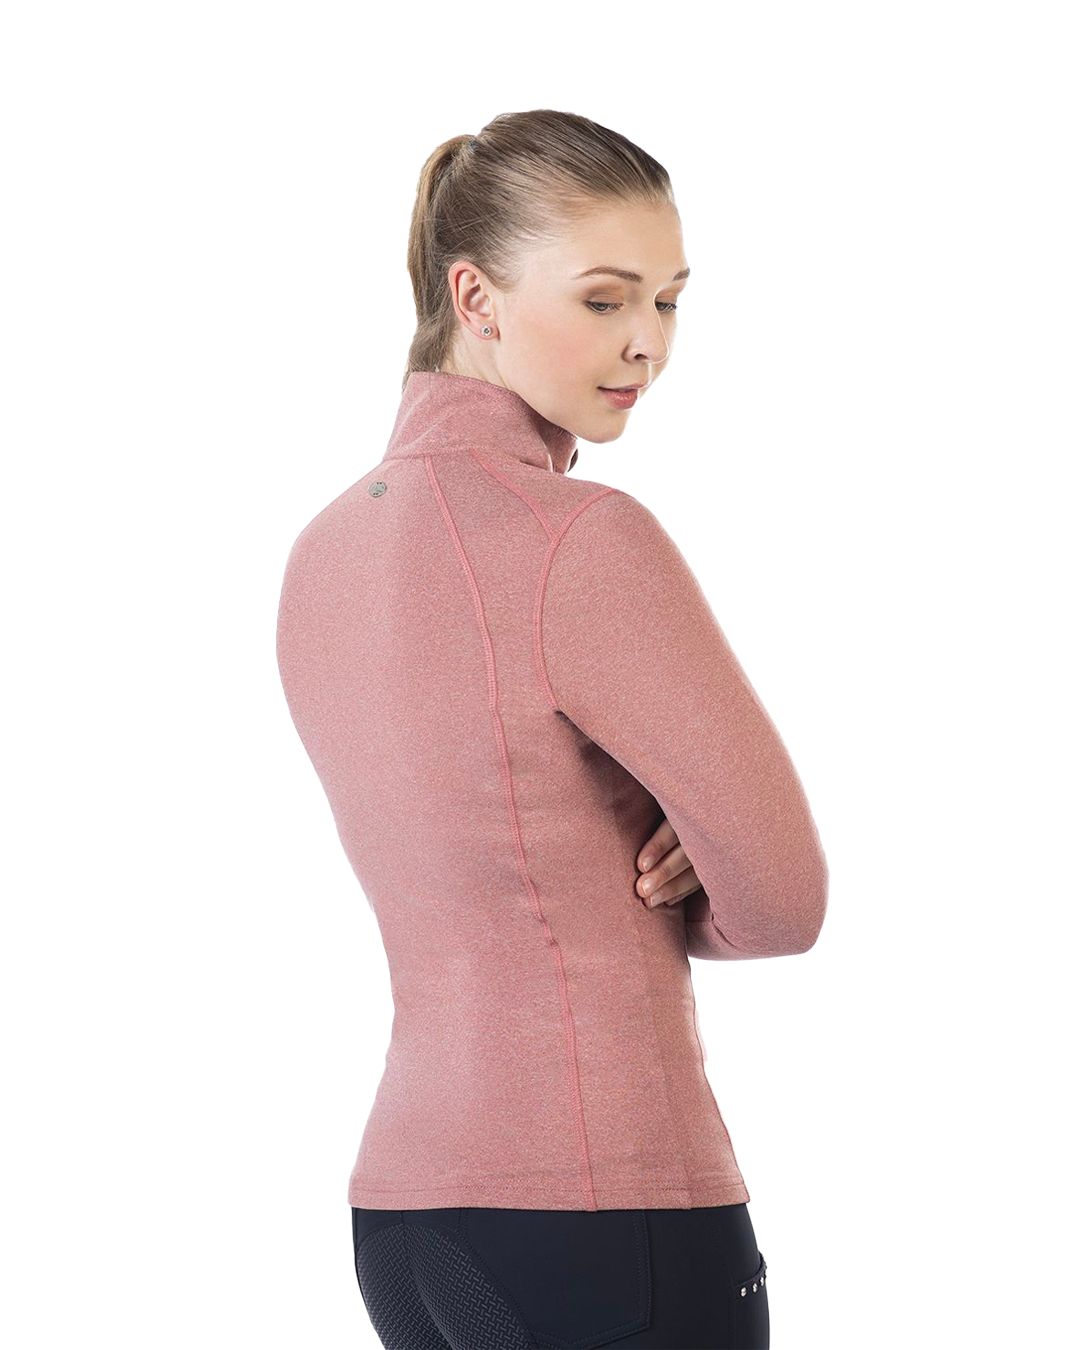 HKM Ladies Mio Functional Shirt  HKM - Equestrian Fashion Outfitters